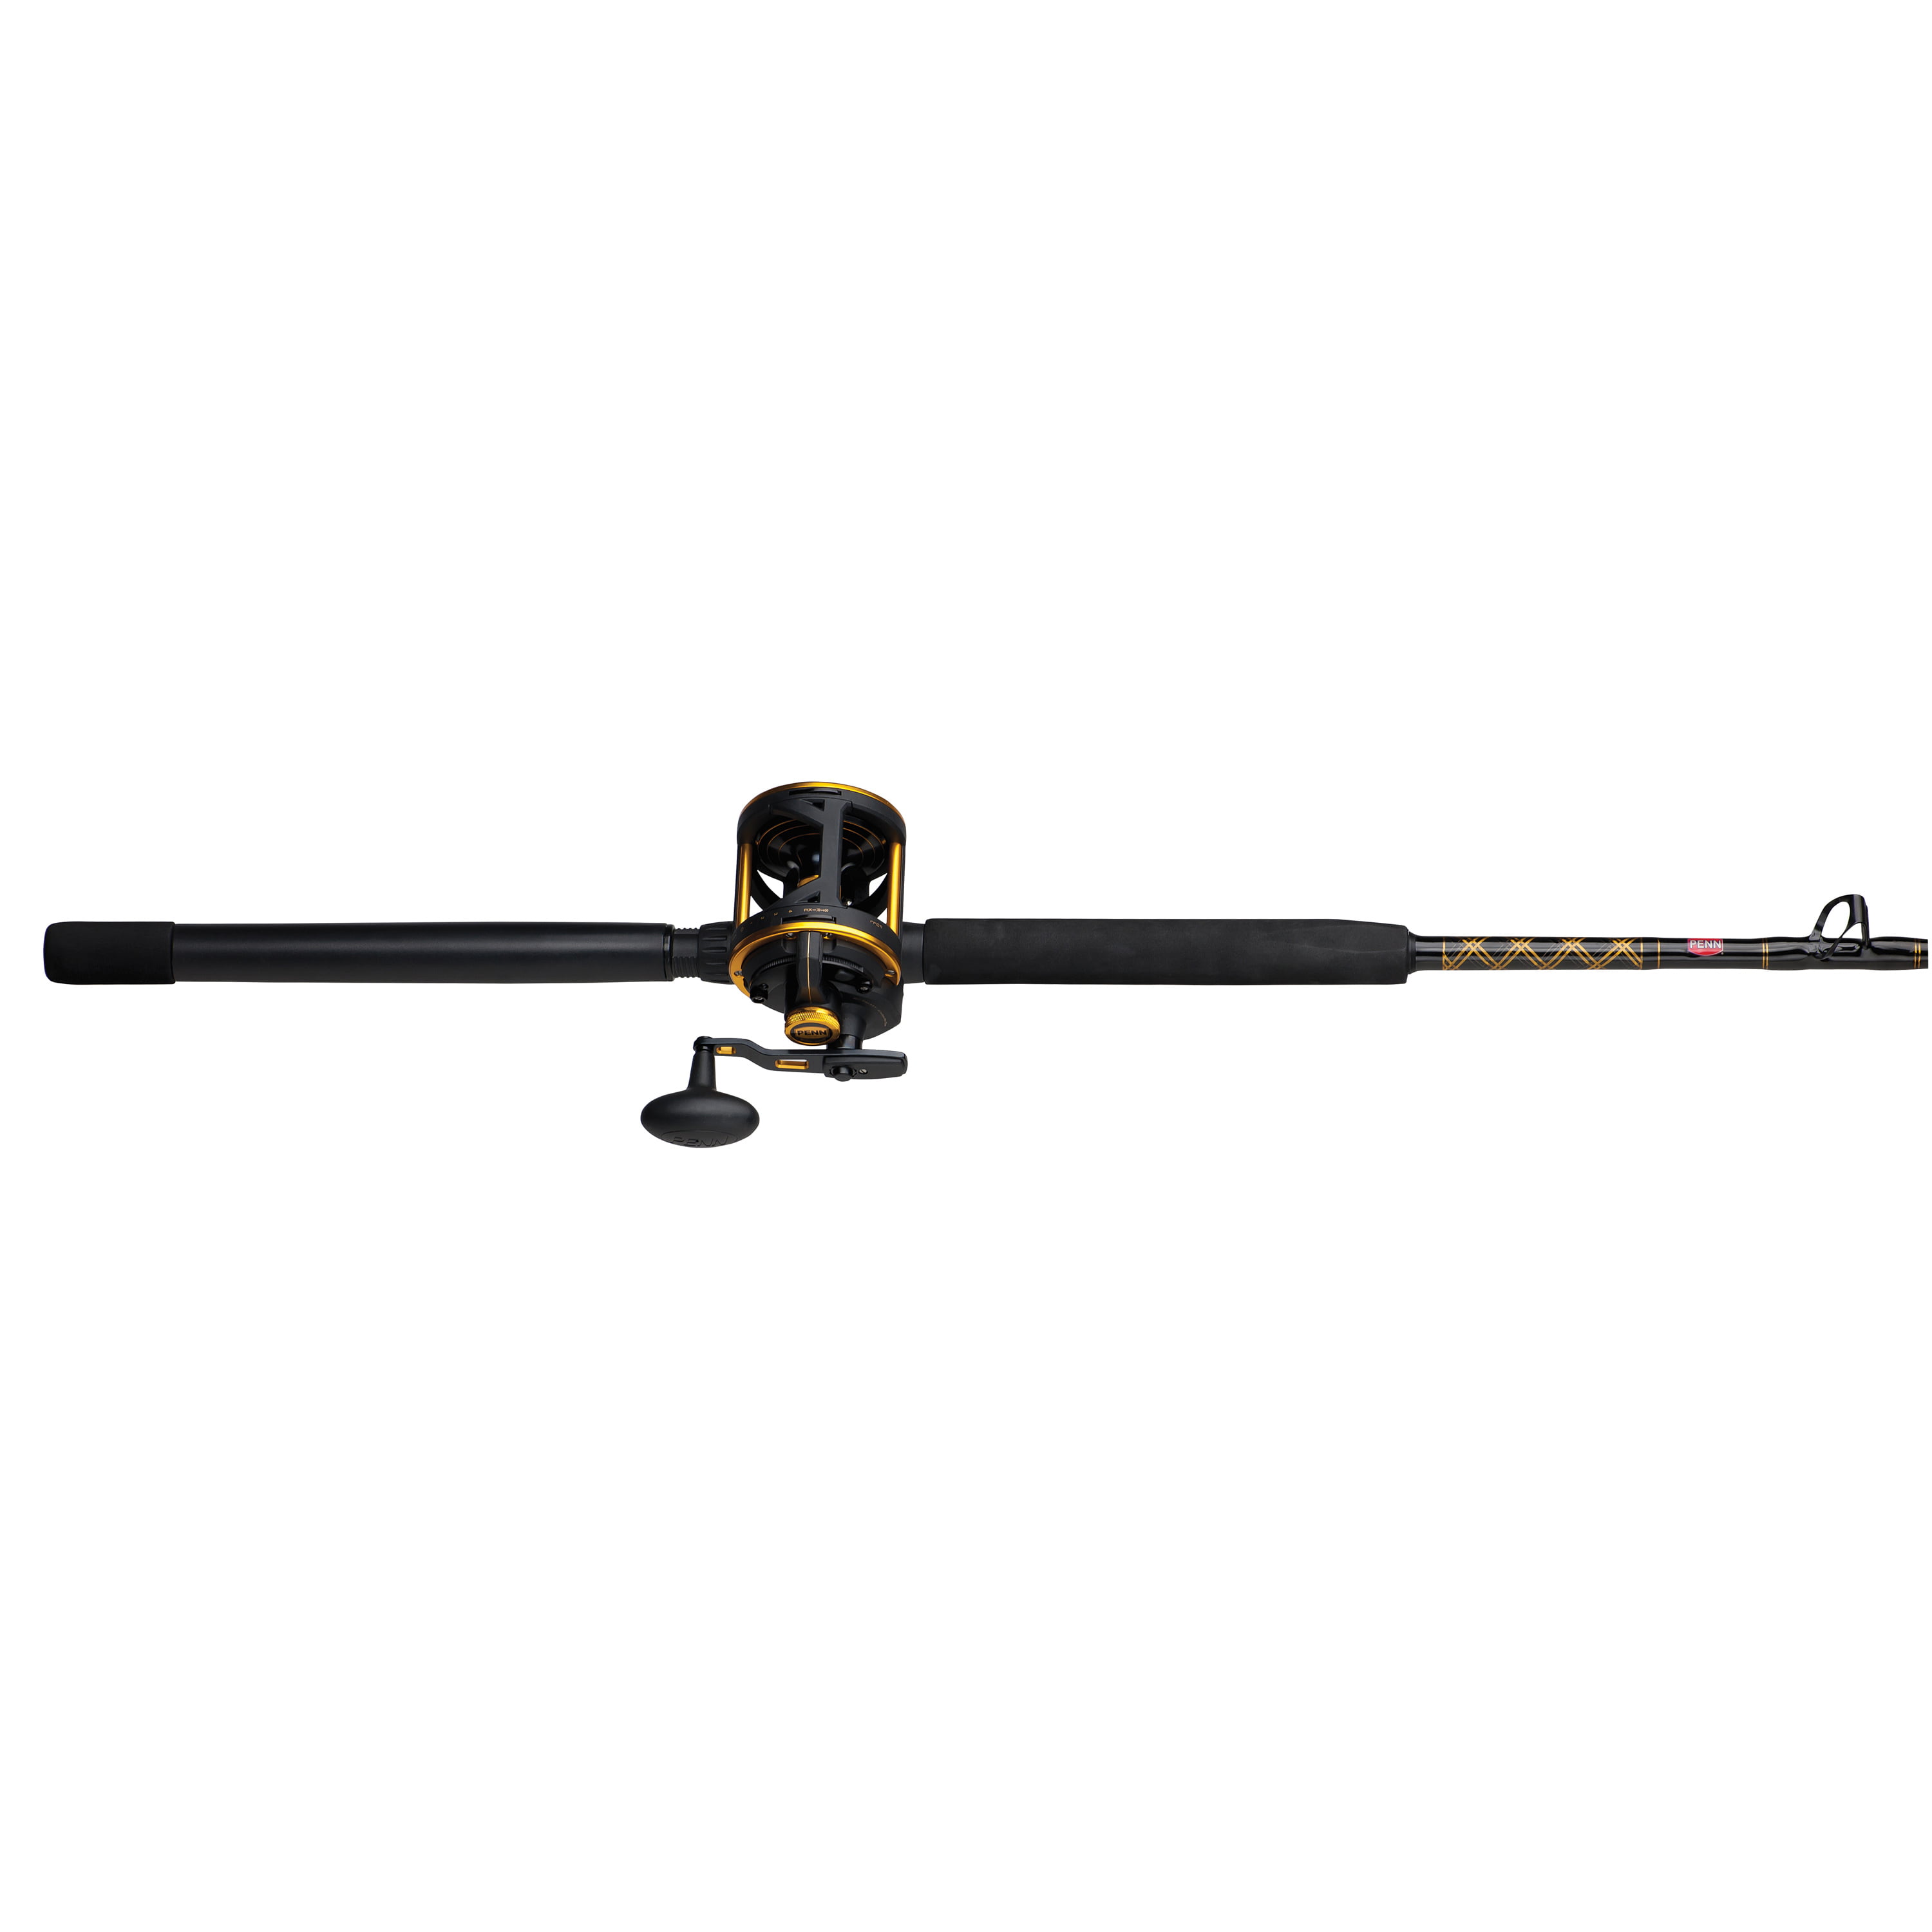 PENN 6'6 Squall Lever Drag Conventional Combo, Reel Size 50